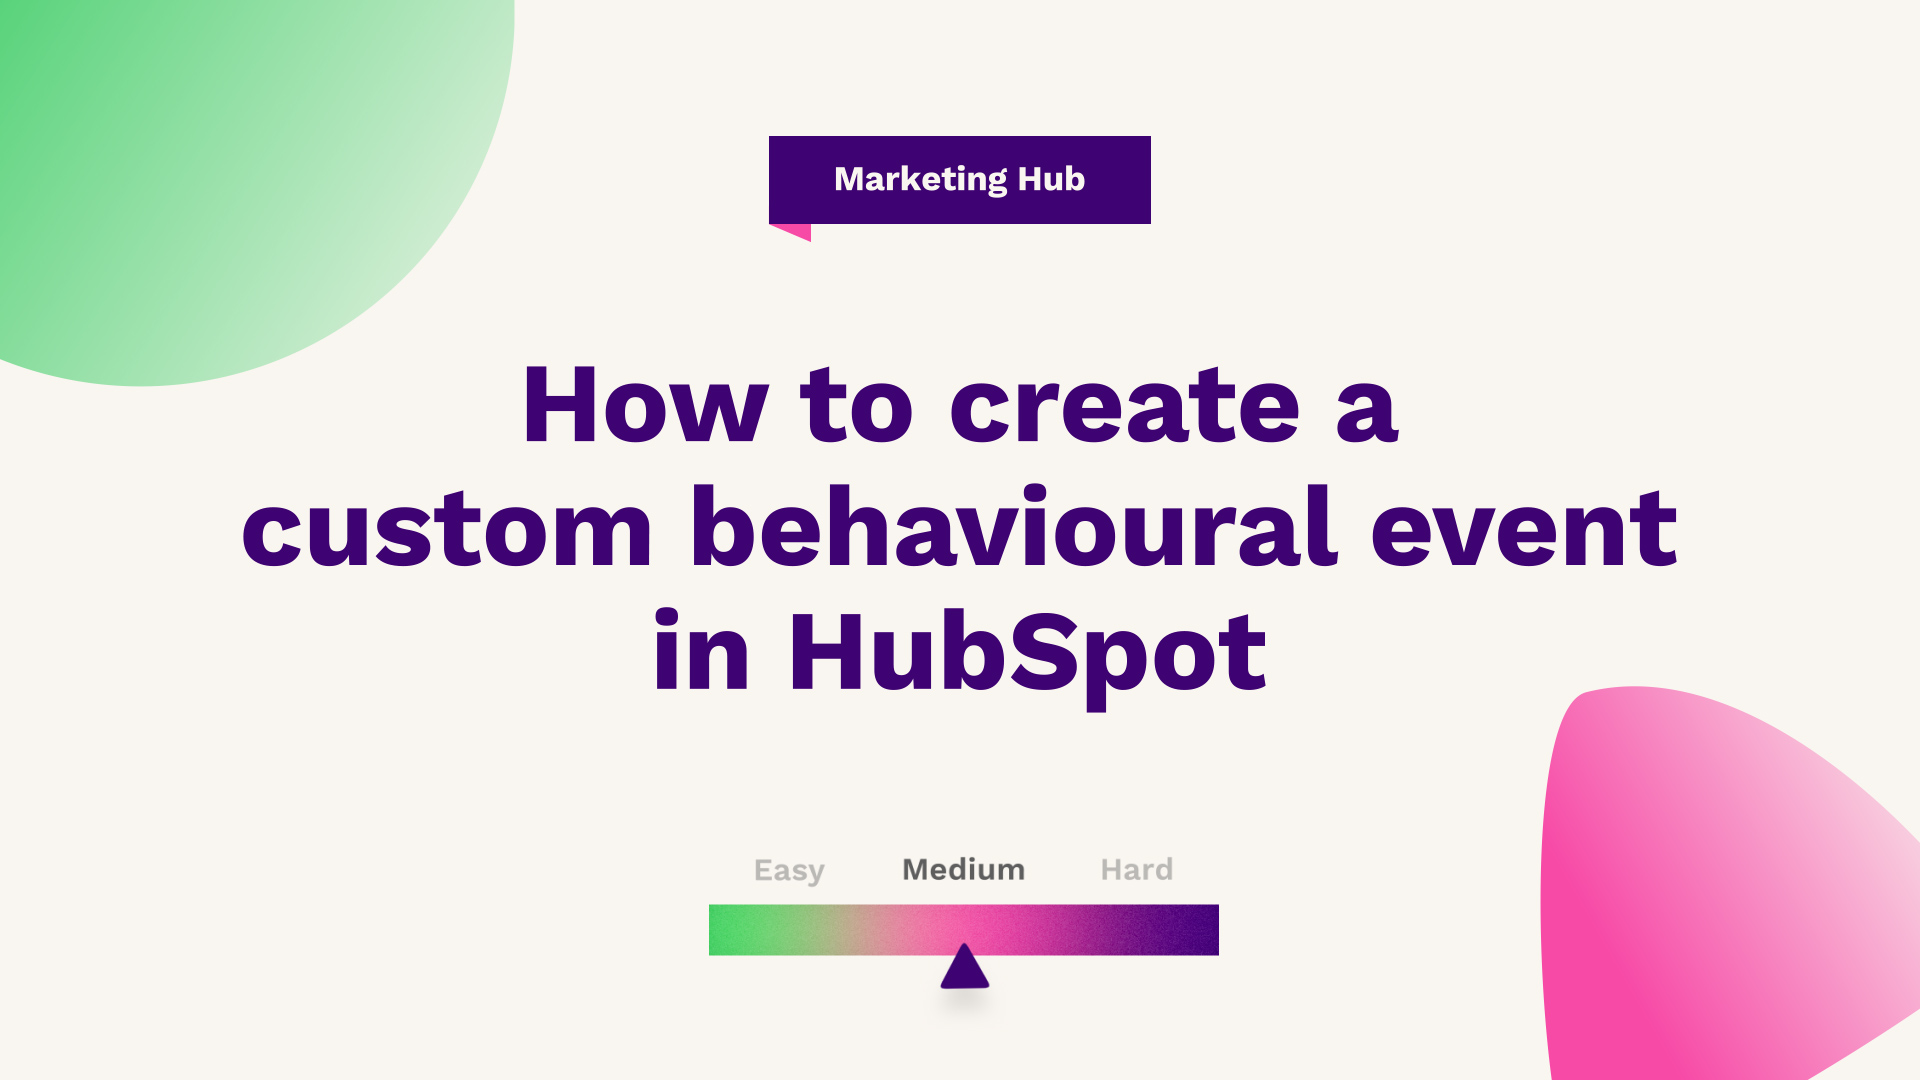 How to create a custom behavioural event in HubSpot